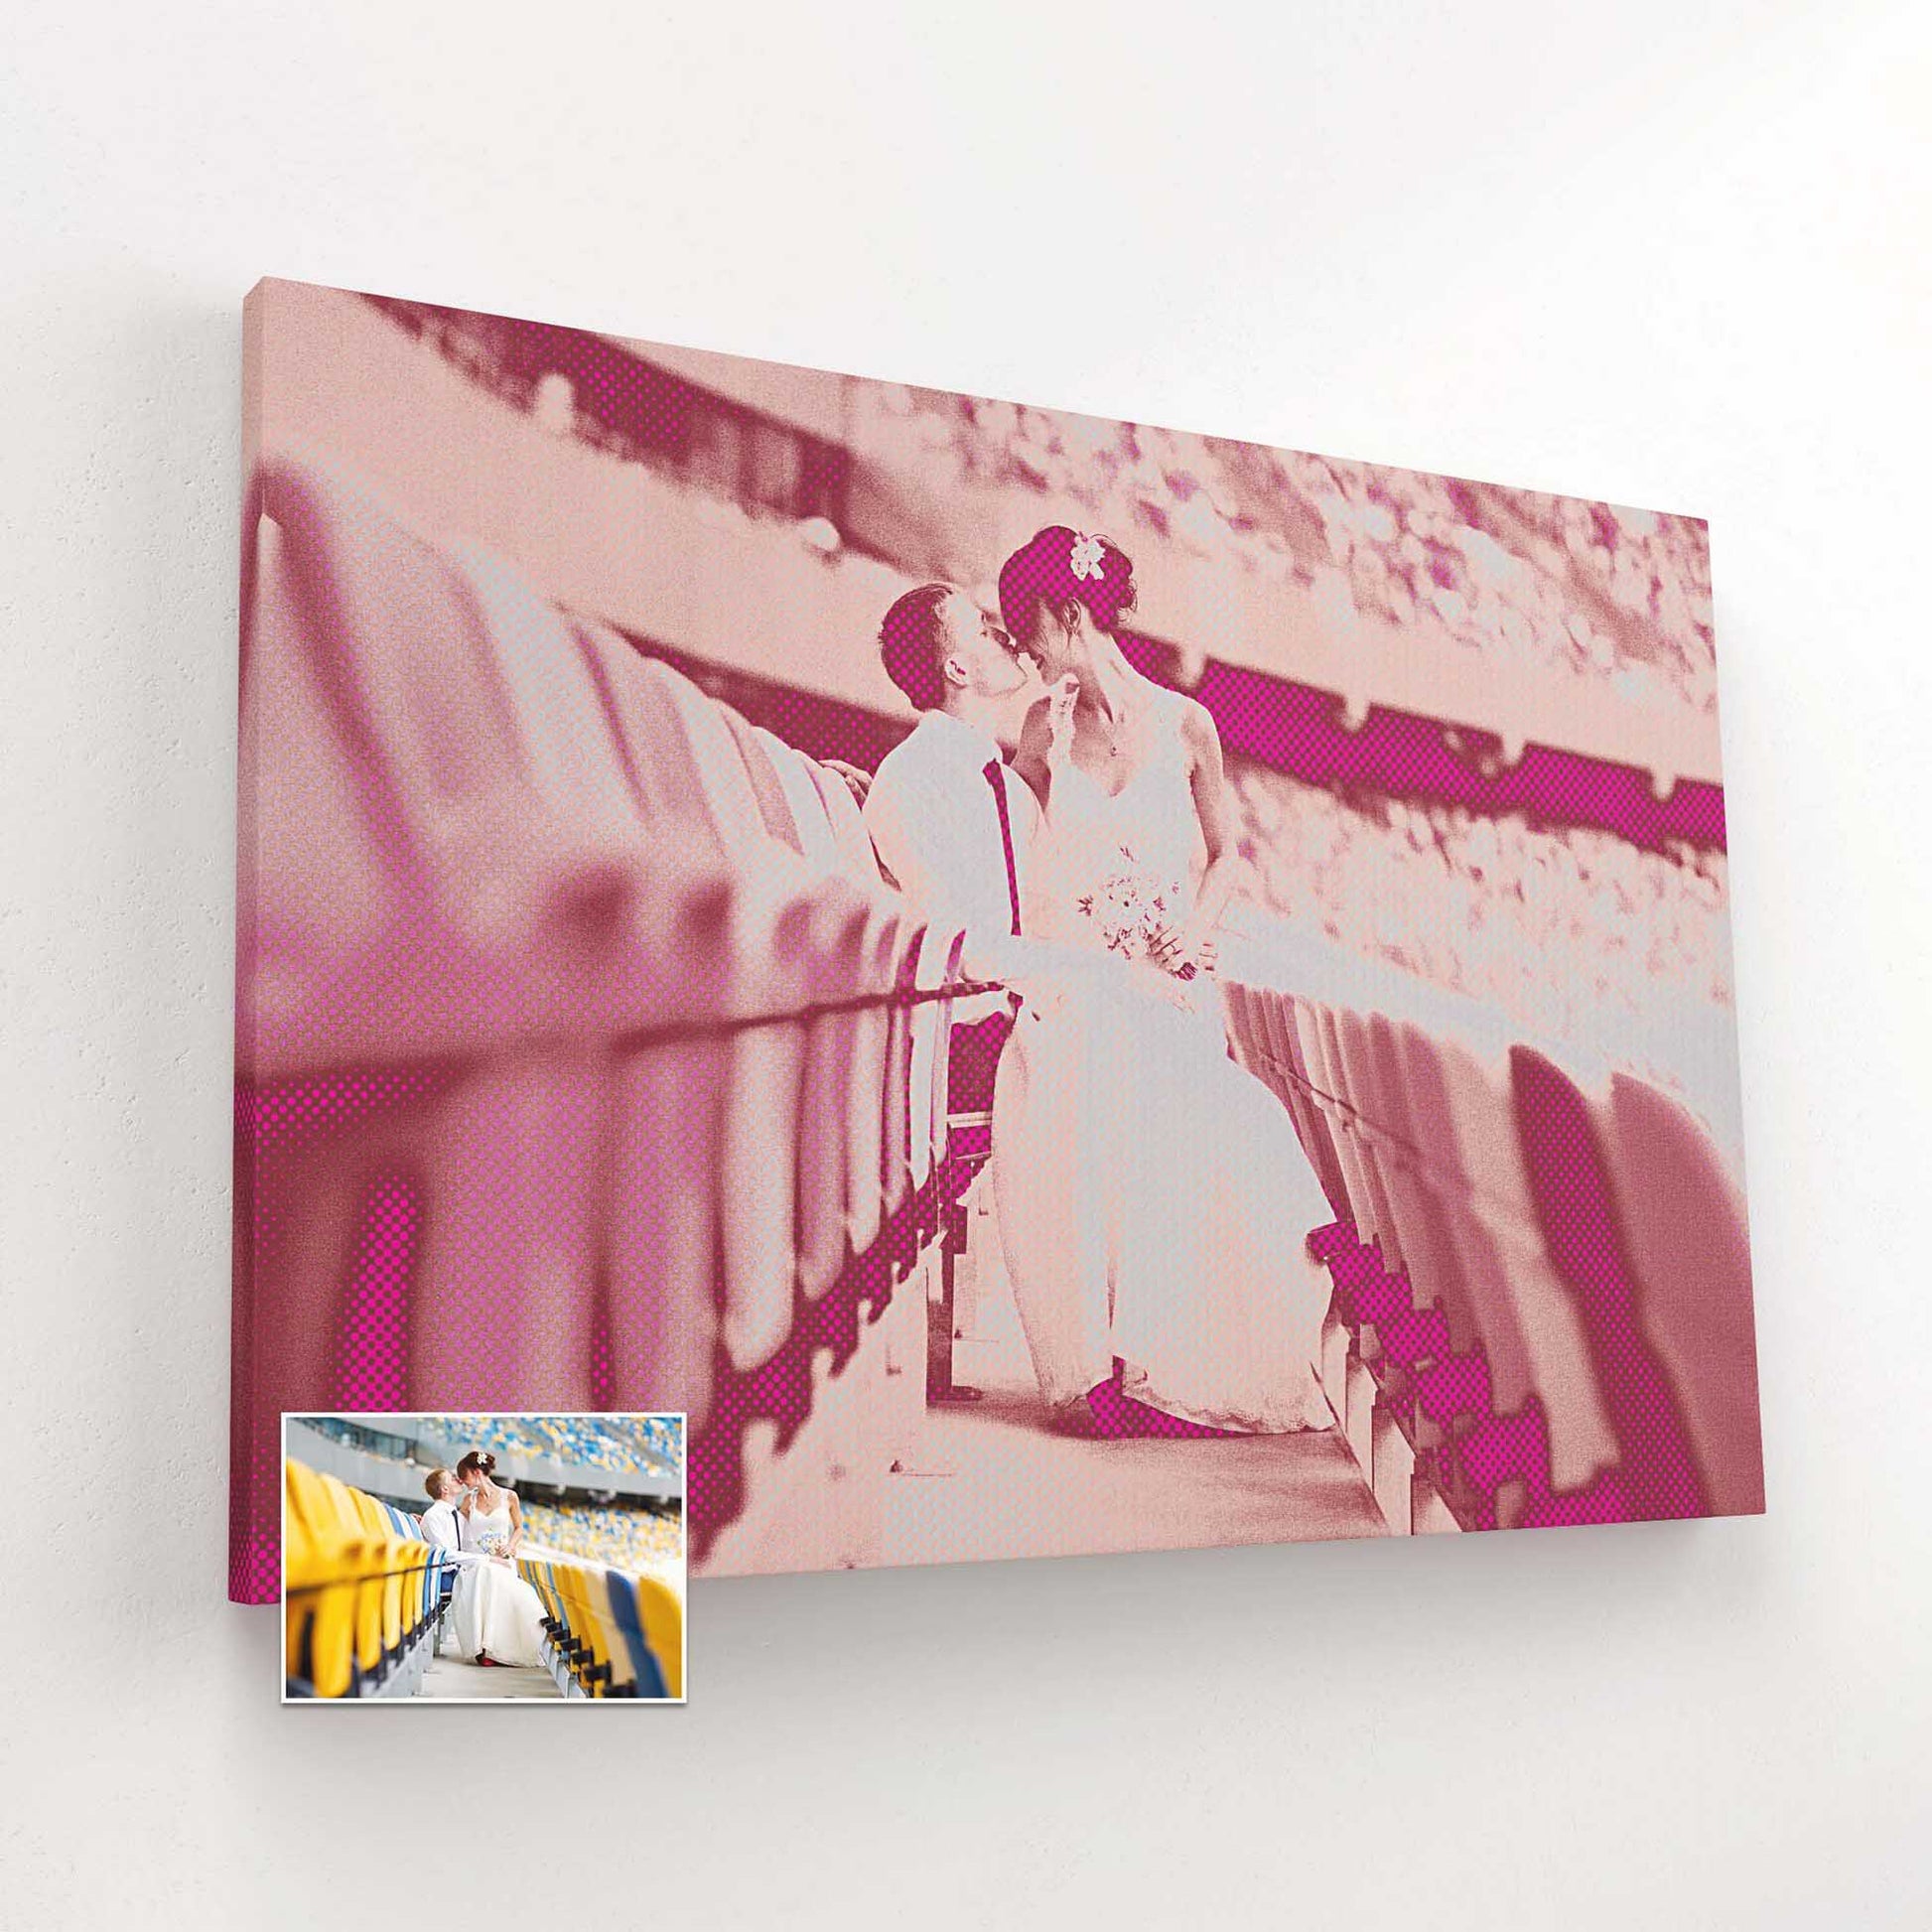 Immerse yourself in the world of pop art with our Personalised Pink Pop Art Canvas. Its vibrant hues and bold design exude coolness and trendiness, making it the perfect addition to any modern space. Handmade with care, bespoke canvas